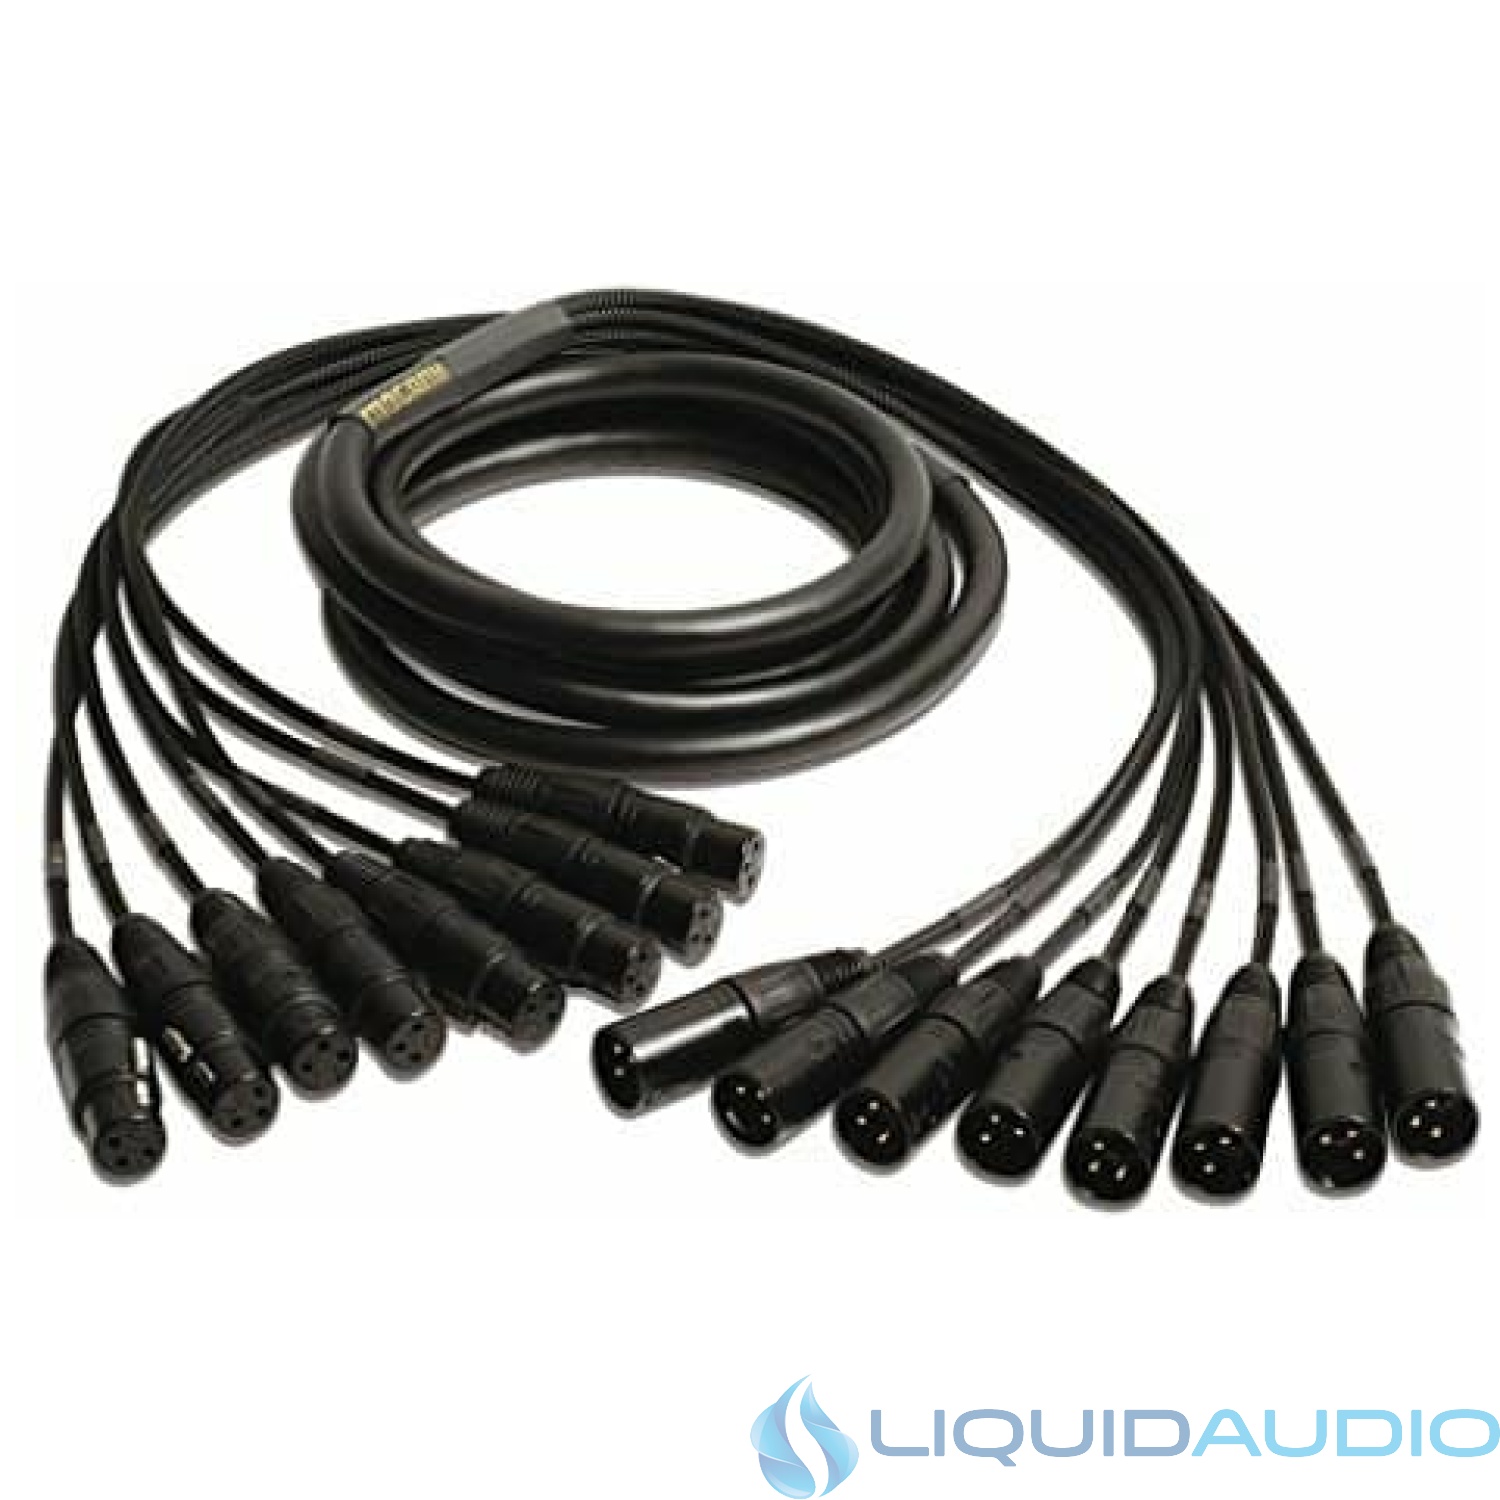 Mogami GOLD 8 XLR-XLR-15 Audio Snake Cable, 8 Channel Fan-Out, XLR-Female to XLR-Male, Gold Contacts, Straight Connectors, 15 Foot